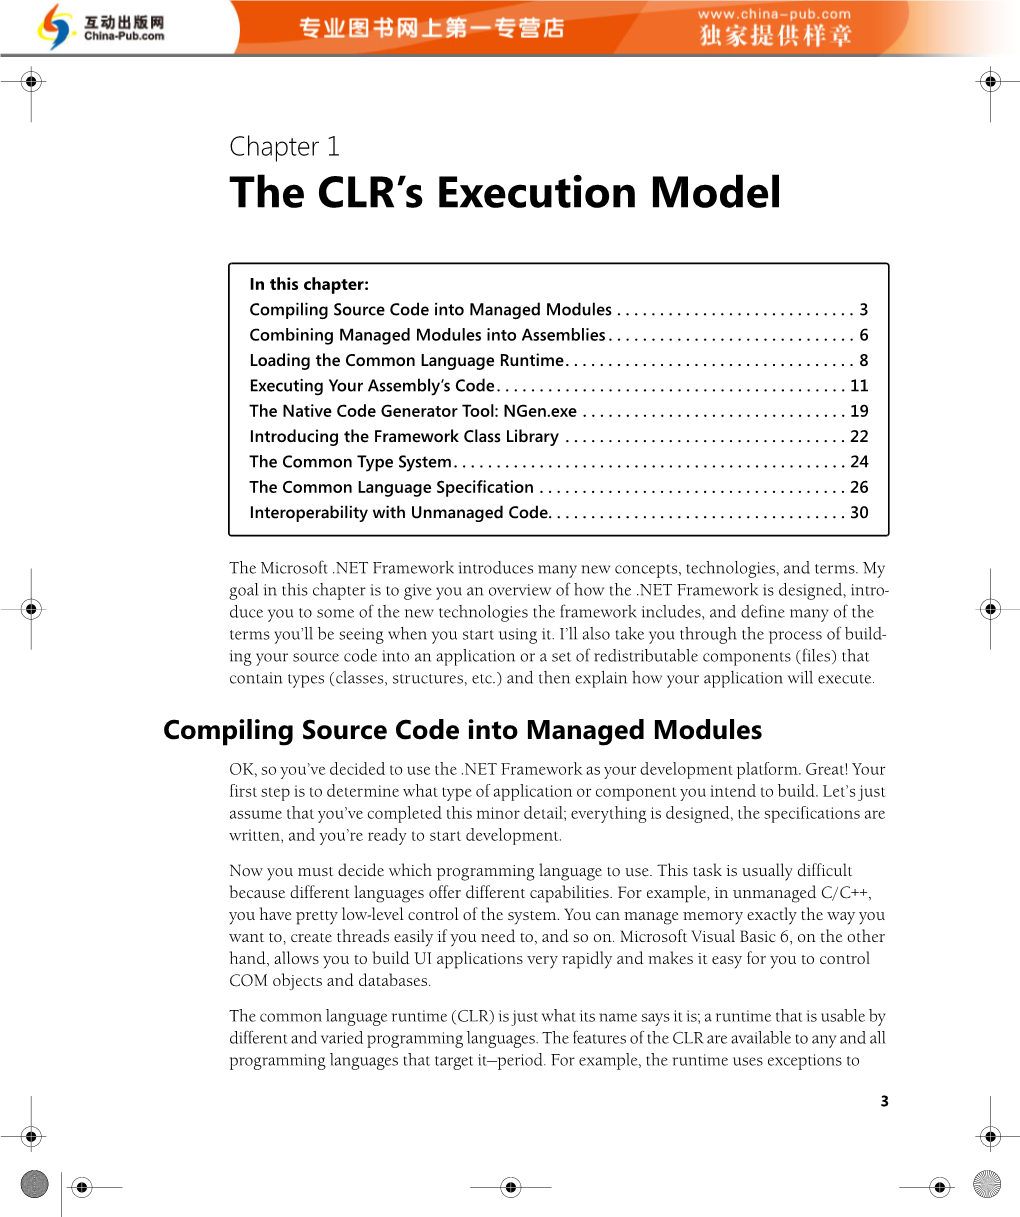 The CLR's Execution Model